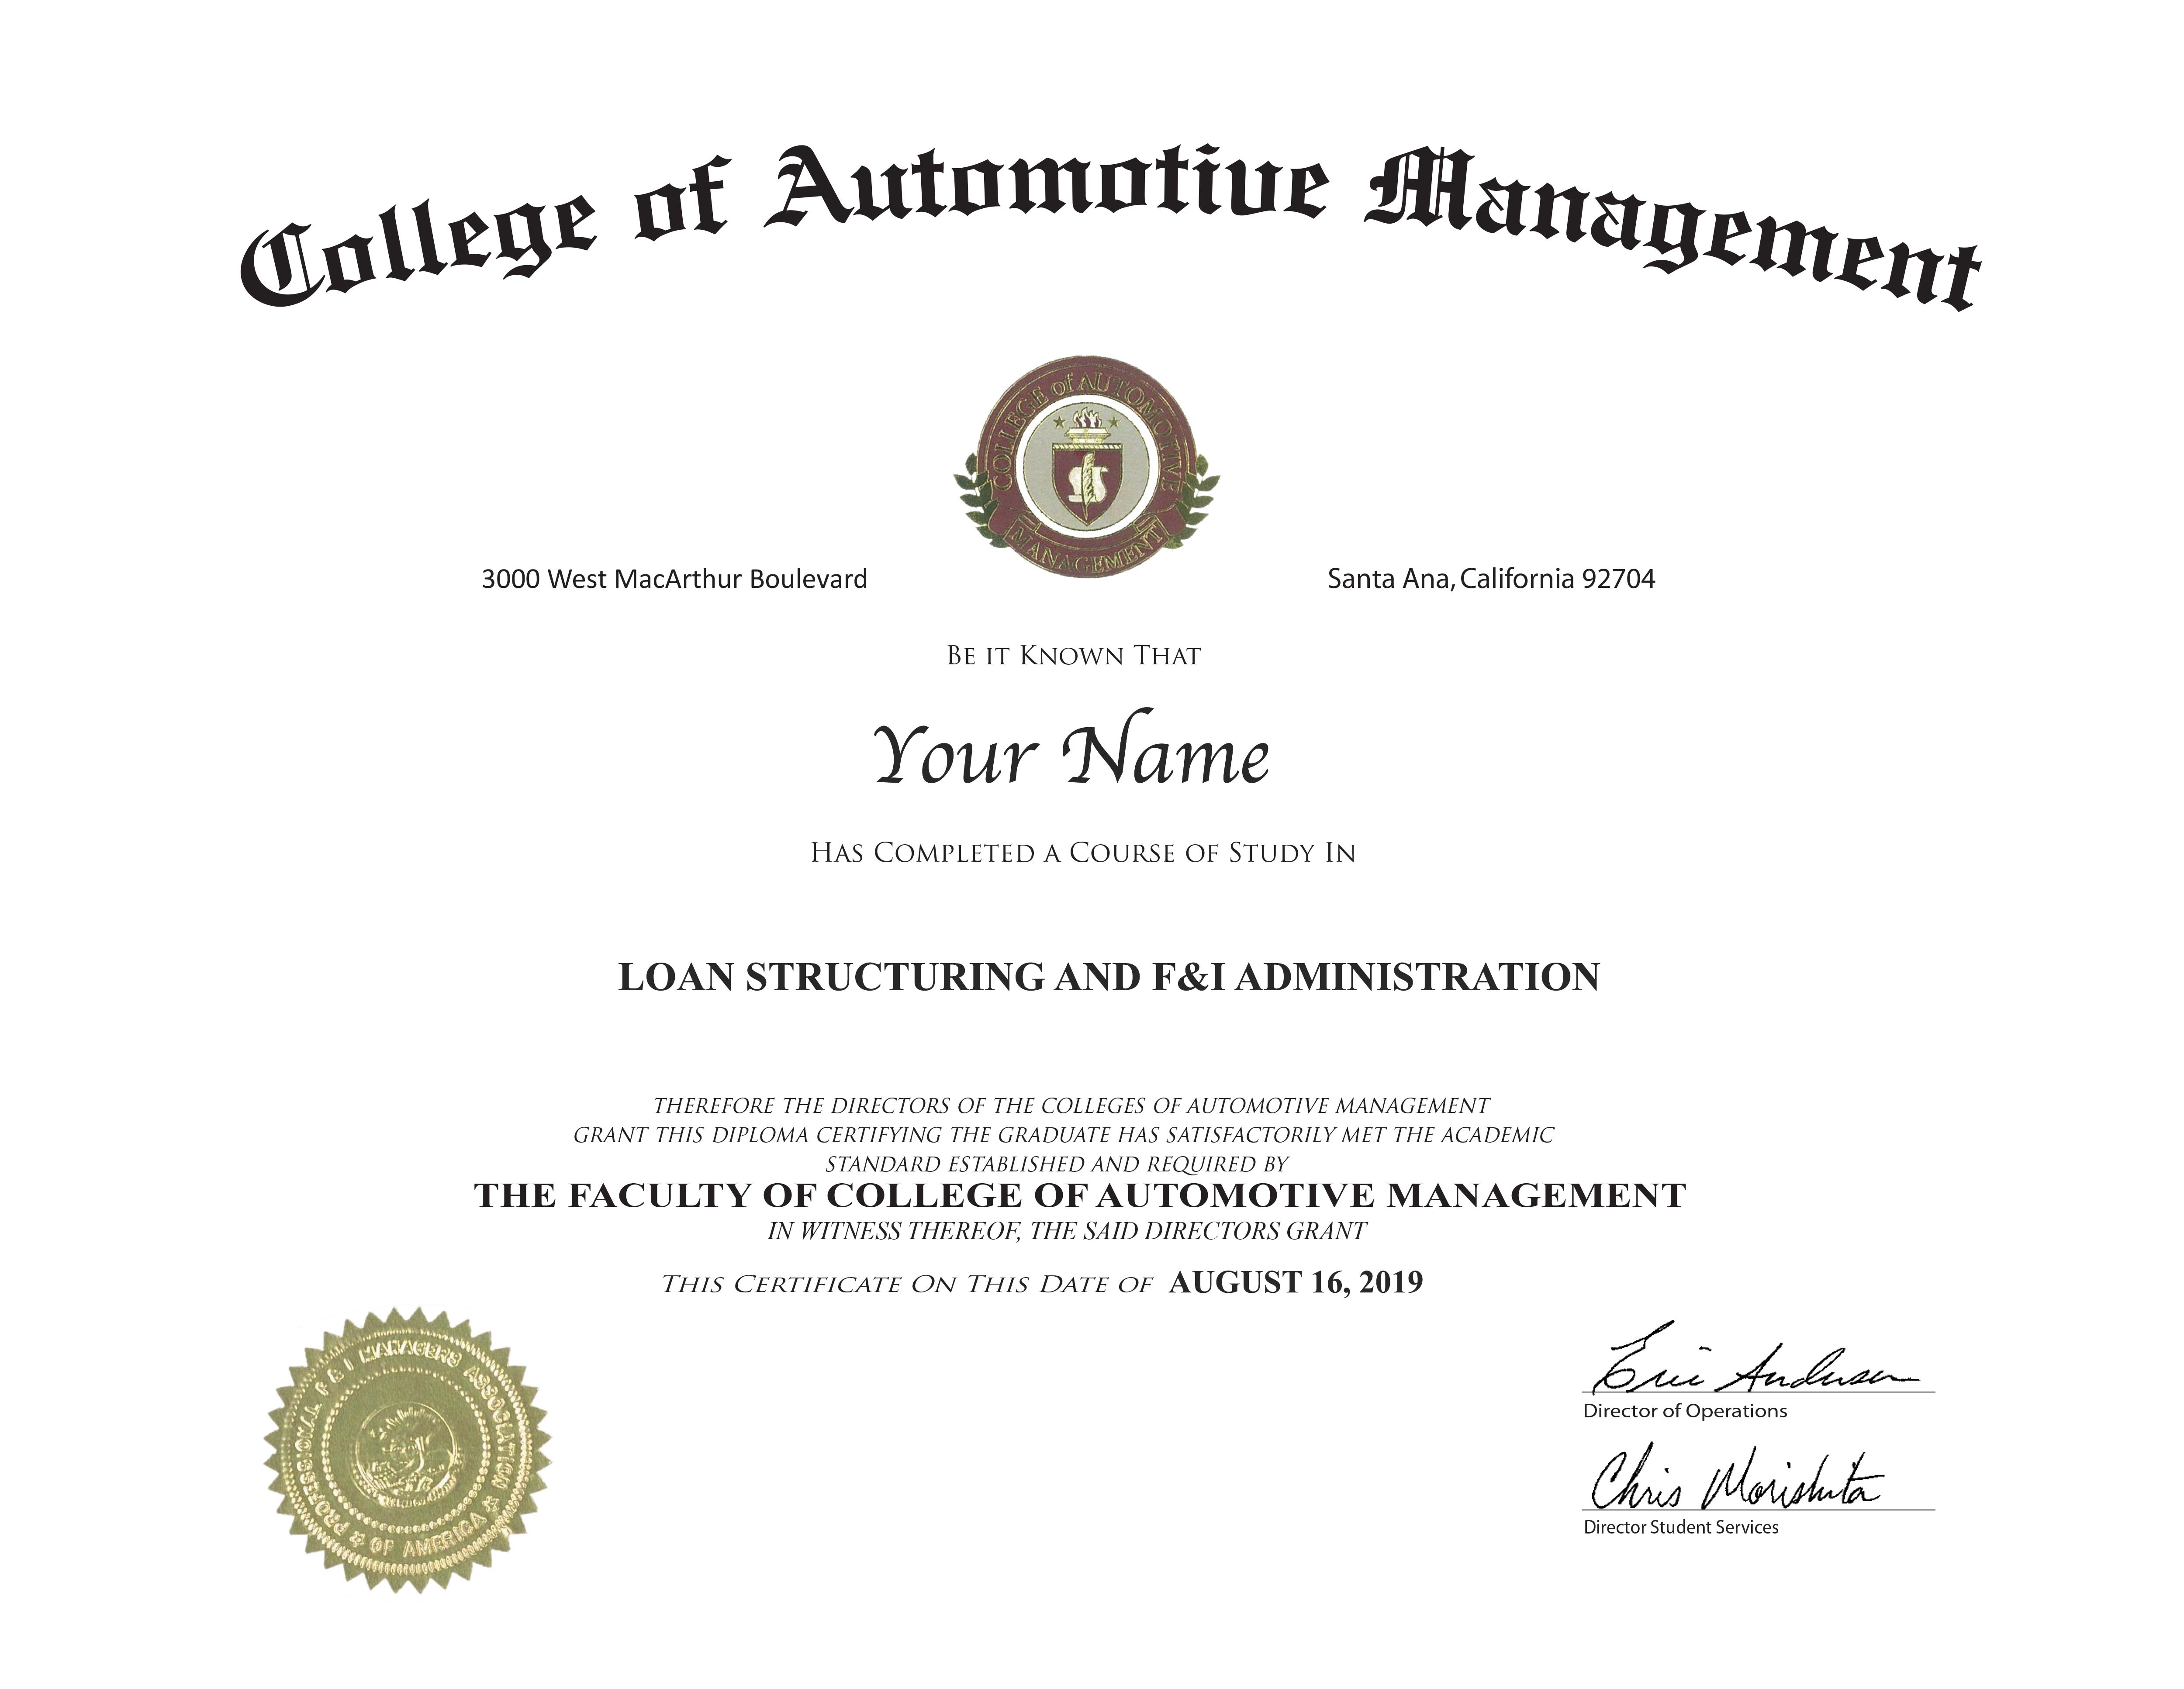 Loan Underwriting and F&I Administration - certificate